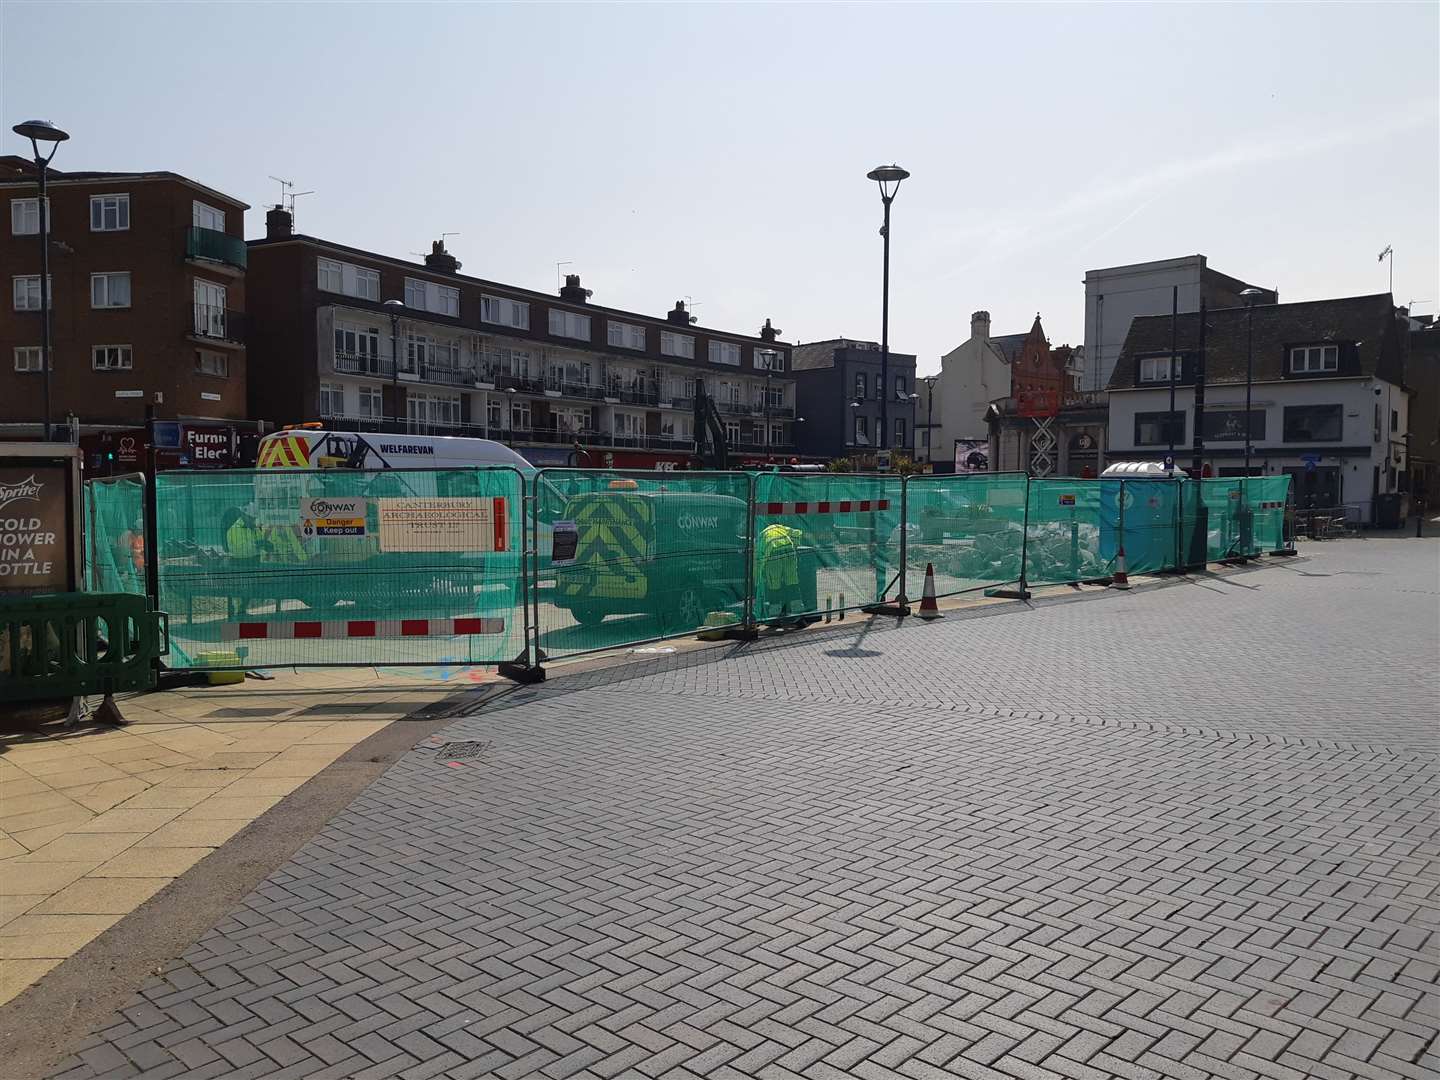 The dig at the town square is over three weeks. Picture: Sam Lennon